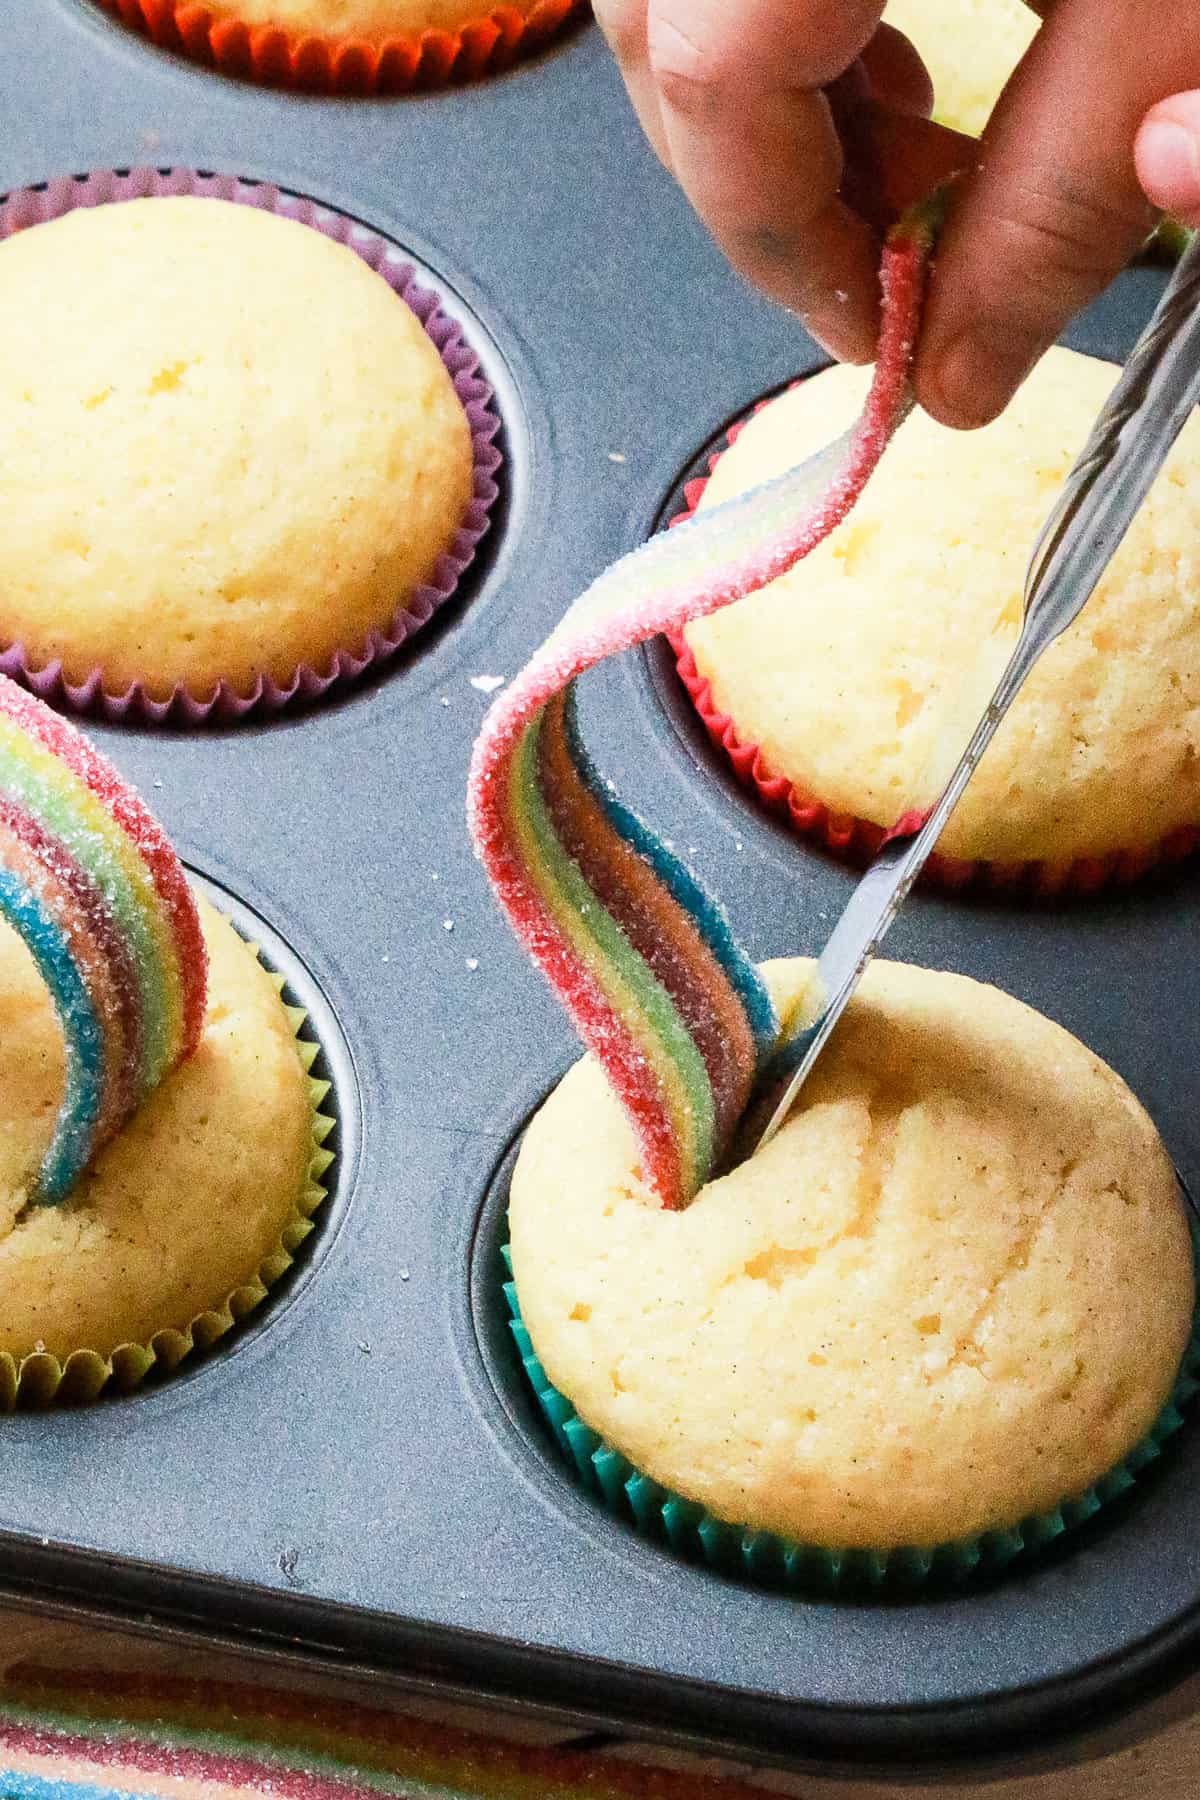 Once the Cupcakes are baked, cut two slits in the top of the cupcake for the Airhead Extreme Candy.